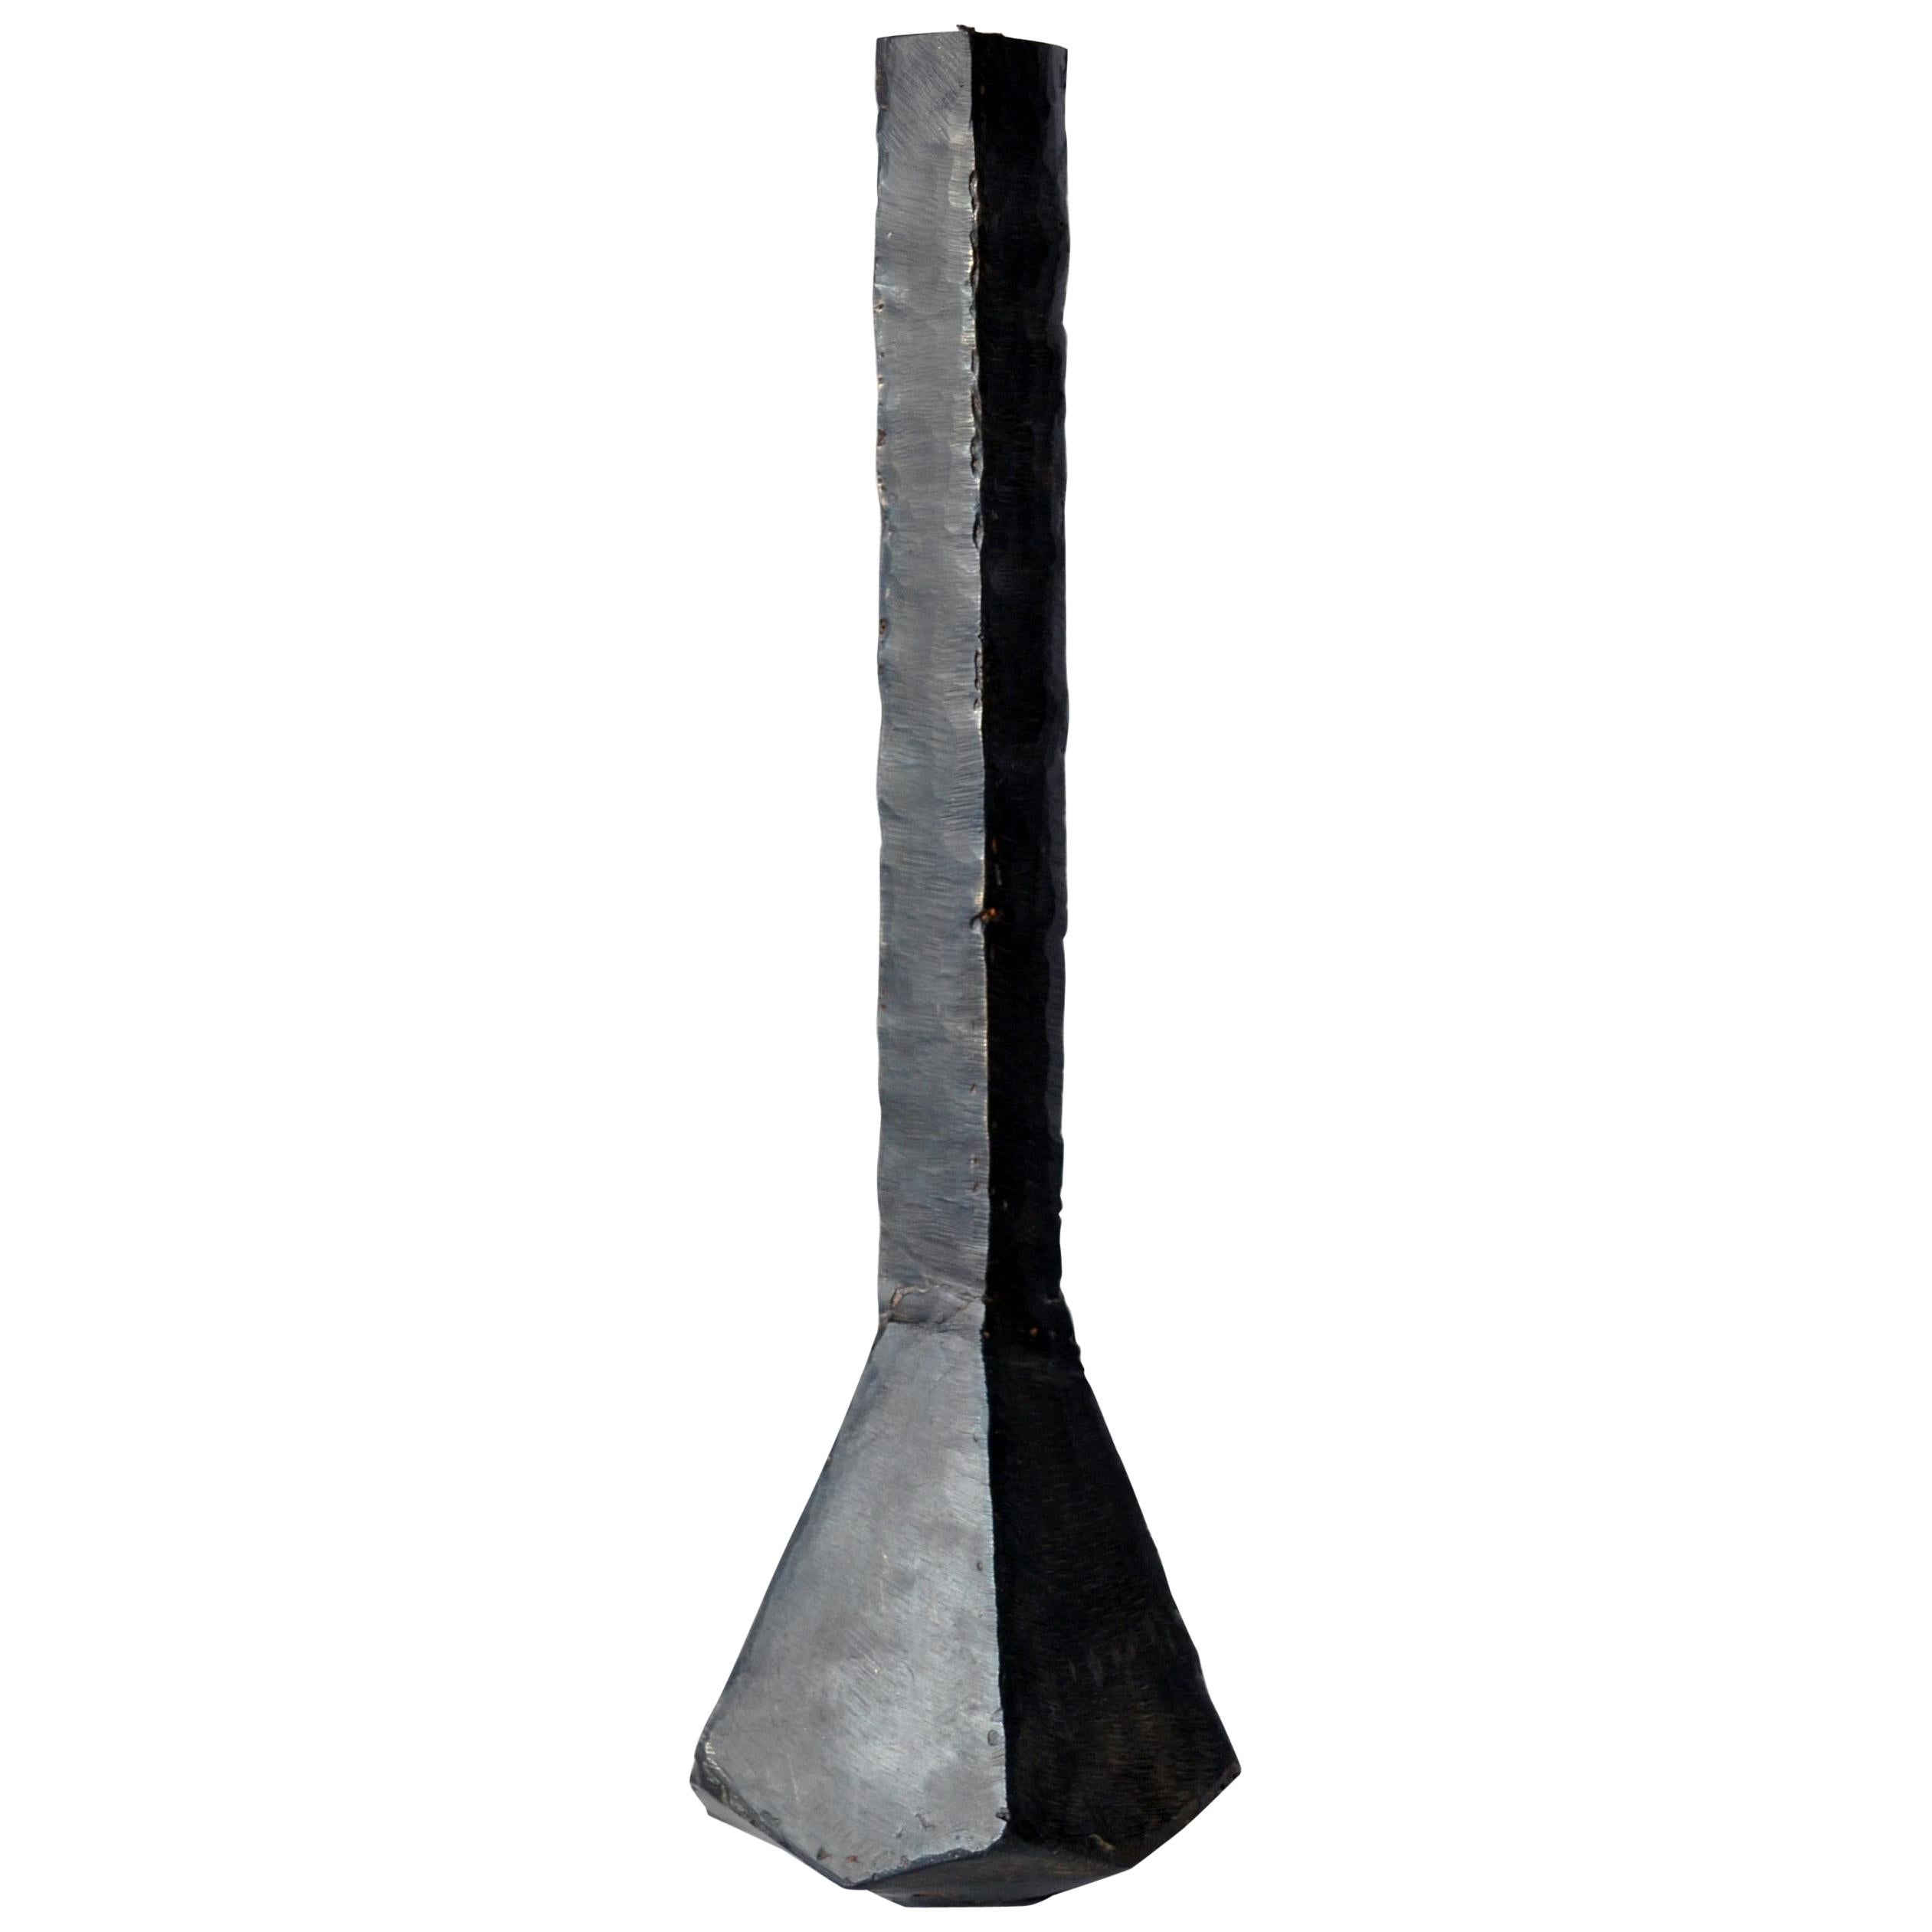 Geometric Vessel Sculpture Contemporary Stark Rough Carved Blackened Waxed Iron For Sale